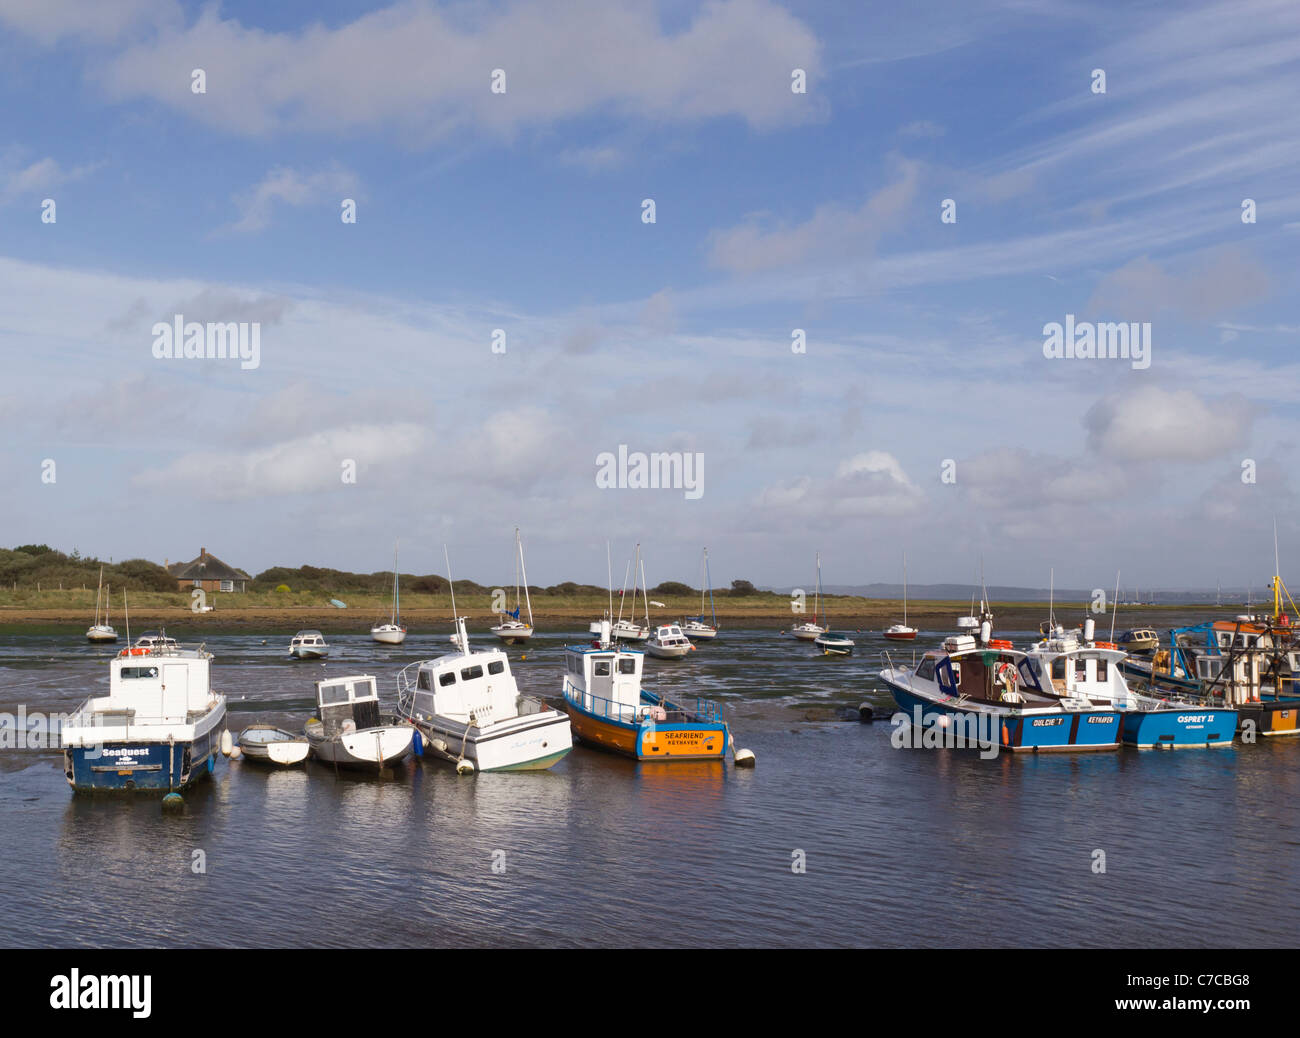 Tranquil view of Moored Fishing Boats and Yachts in tidal estuary at Hurst Castle Spit near Keyhaven Yacht Club, Milford On Sea Stock Photo